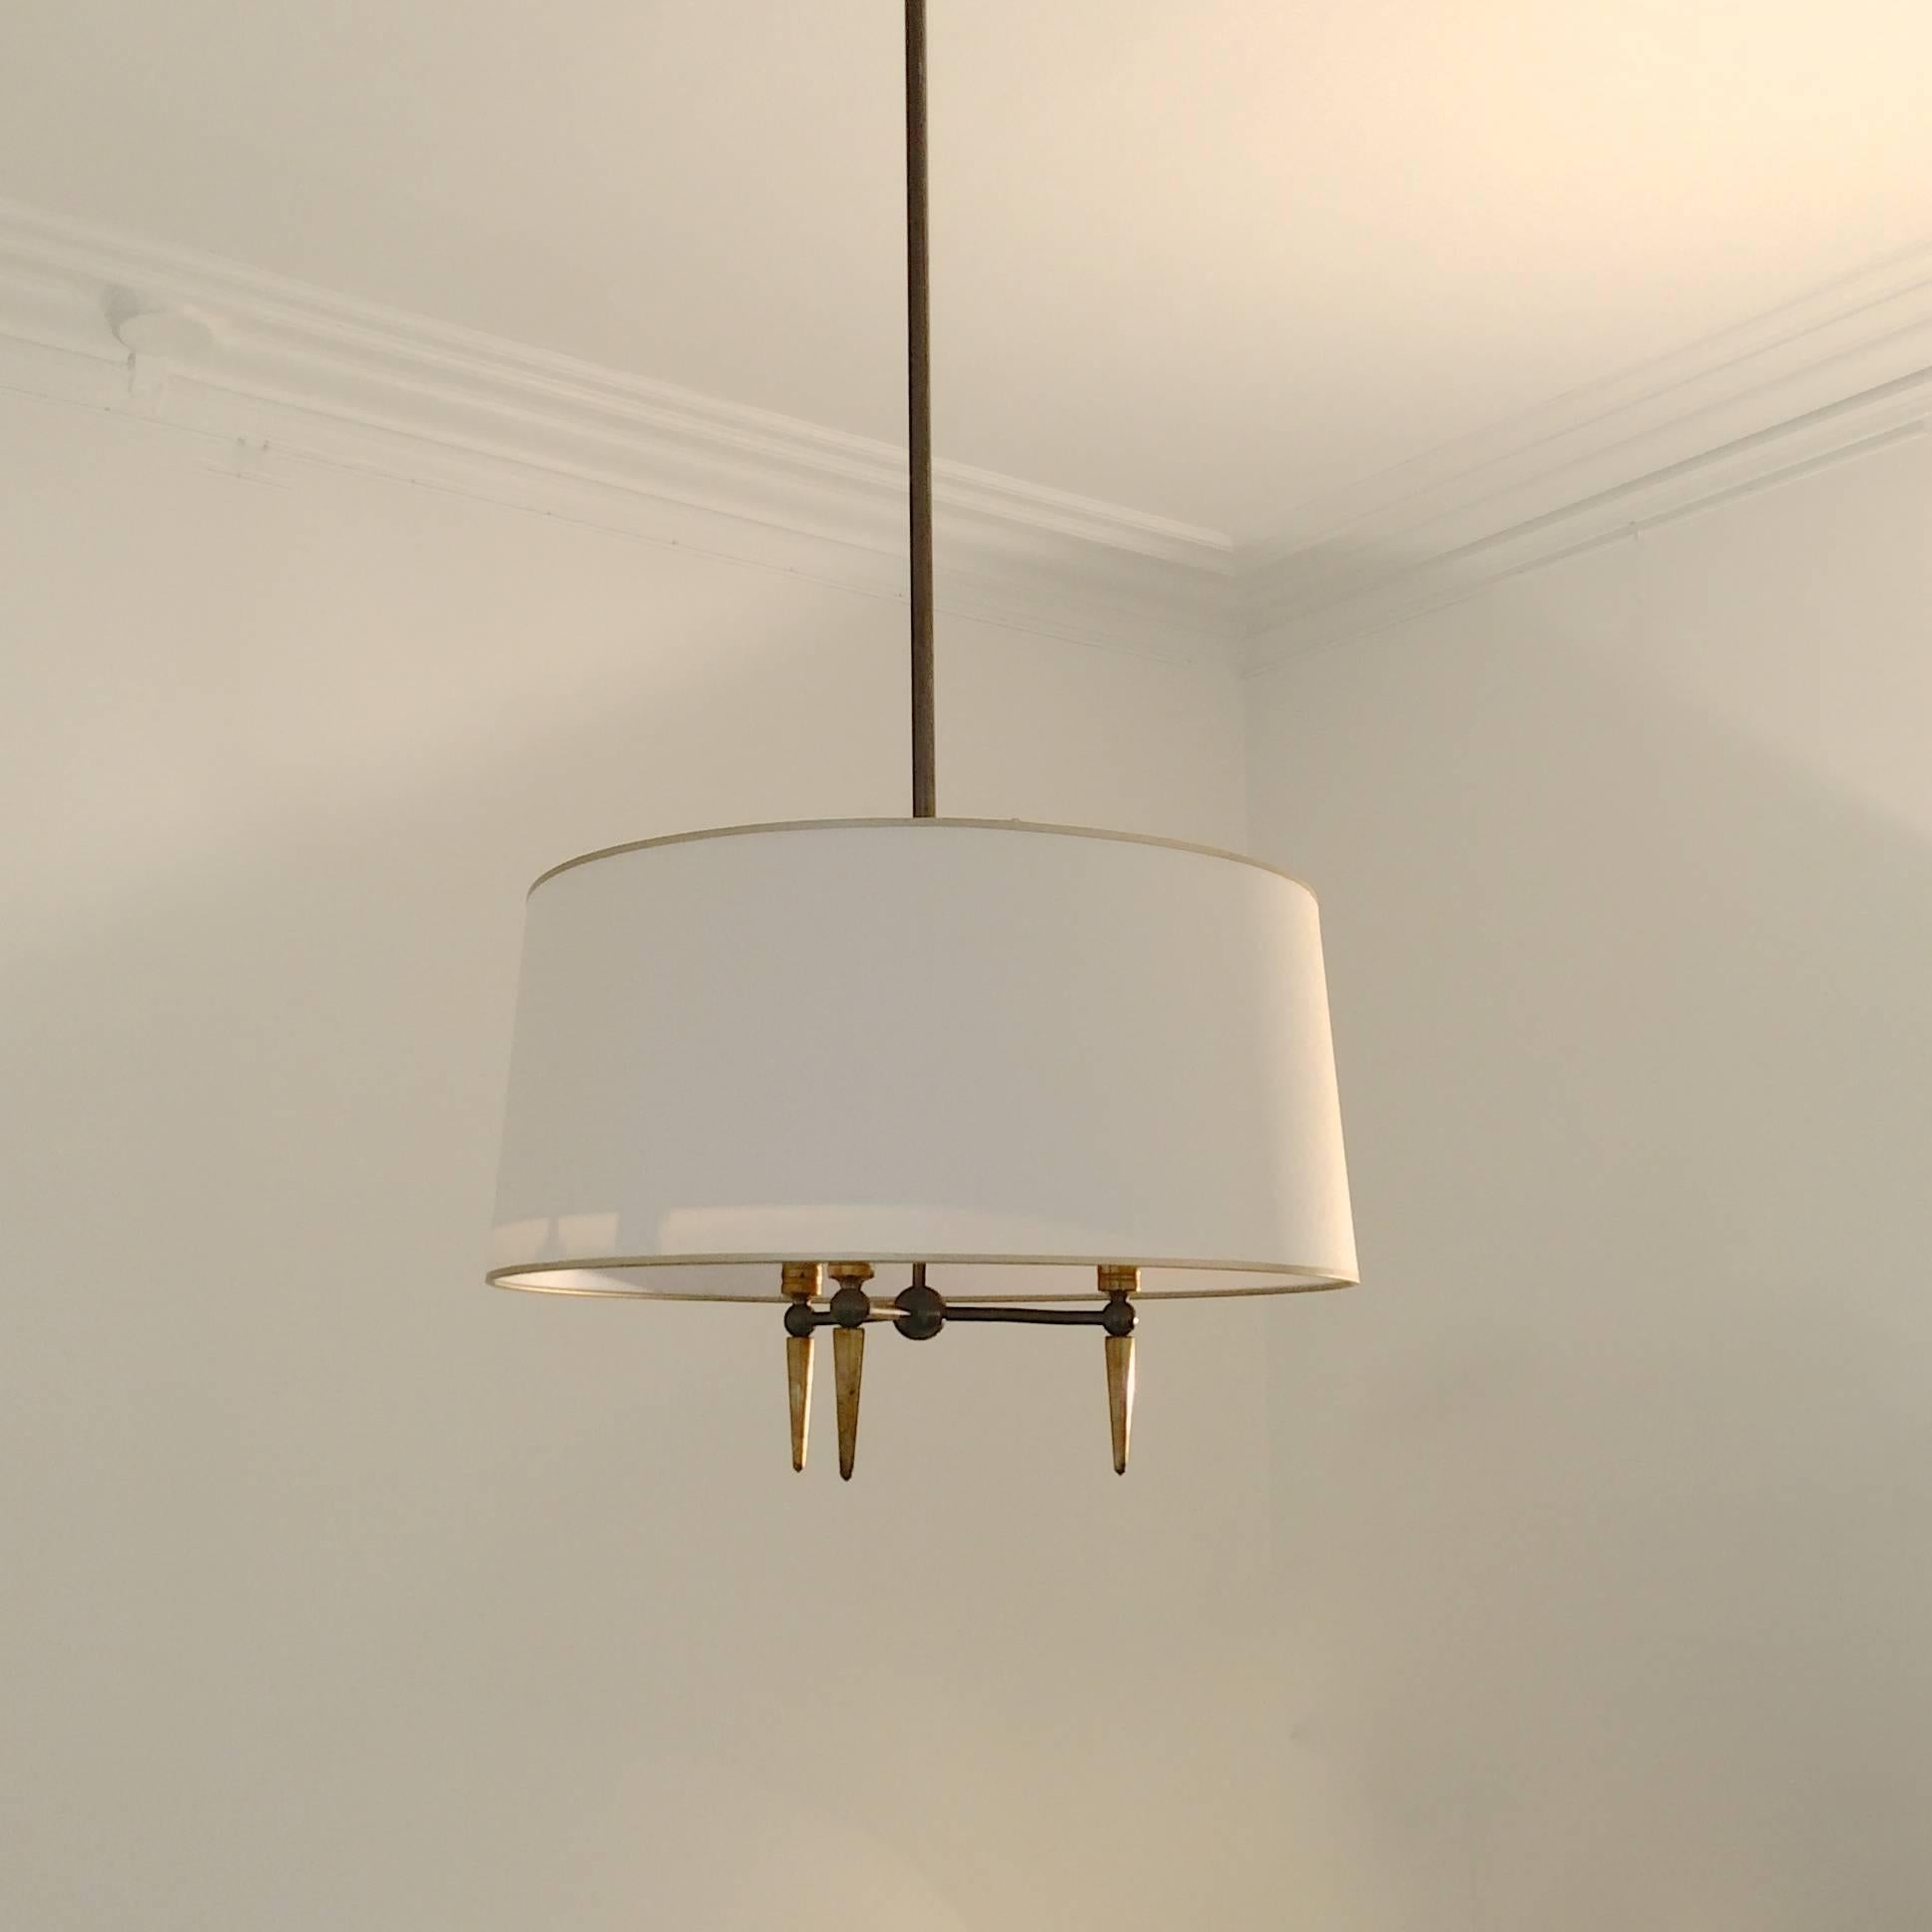 Pendant light, circa 1950, France.
Opaline, fabric shade and patinated brass.
Three E22 bulbs of 40w.
Measures: Height 130 cm, diameter 44 cm.
High of the rod: 100 cm.
All purchases are covered by our Buyer Protection Guarantee.
This item can be